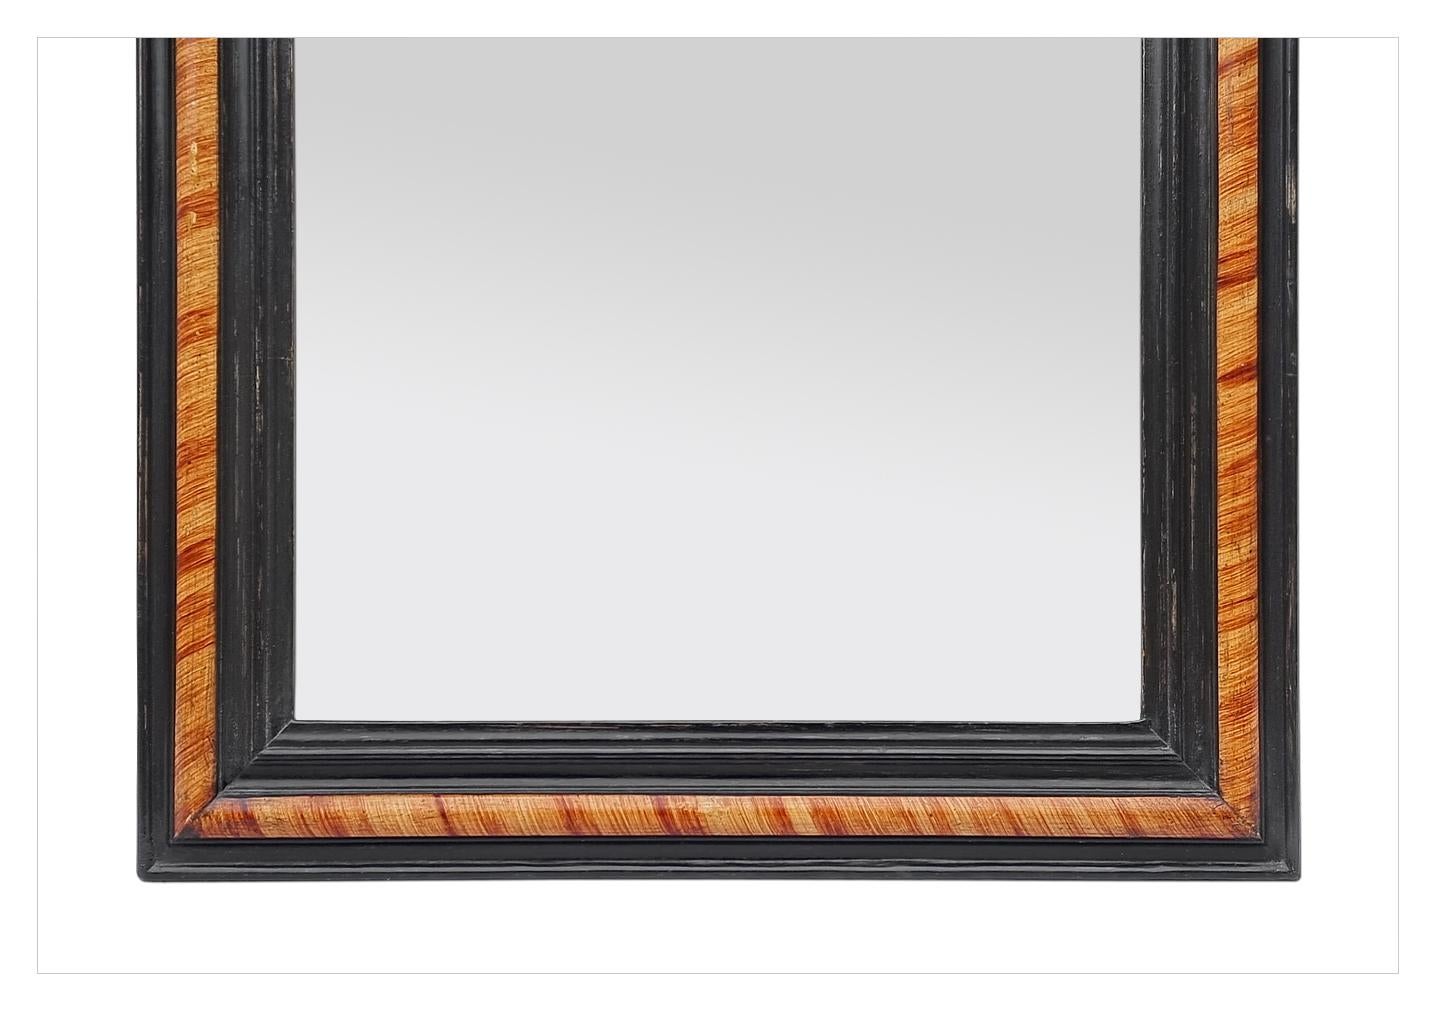 Late 19th Century Antique French Louis-Philippe Style Mirror With Imitation Wood Decor, circa 1880 For Sale